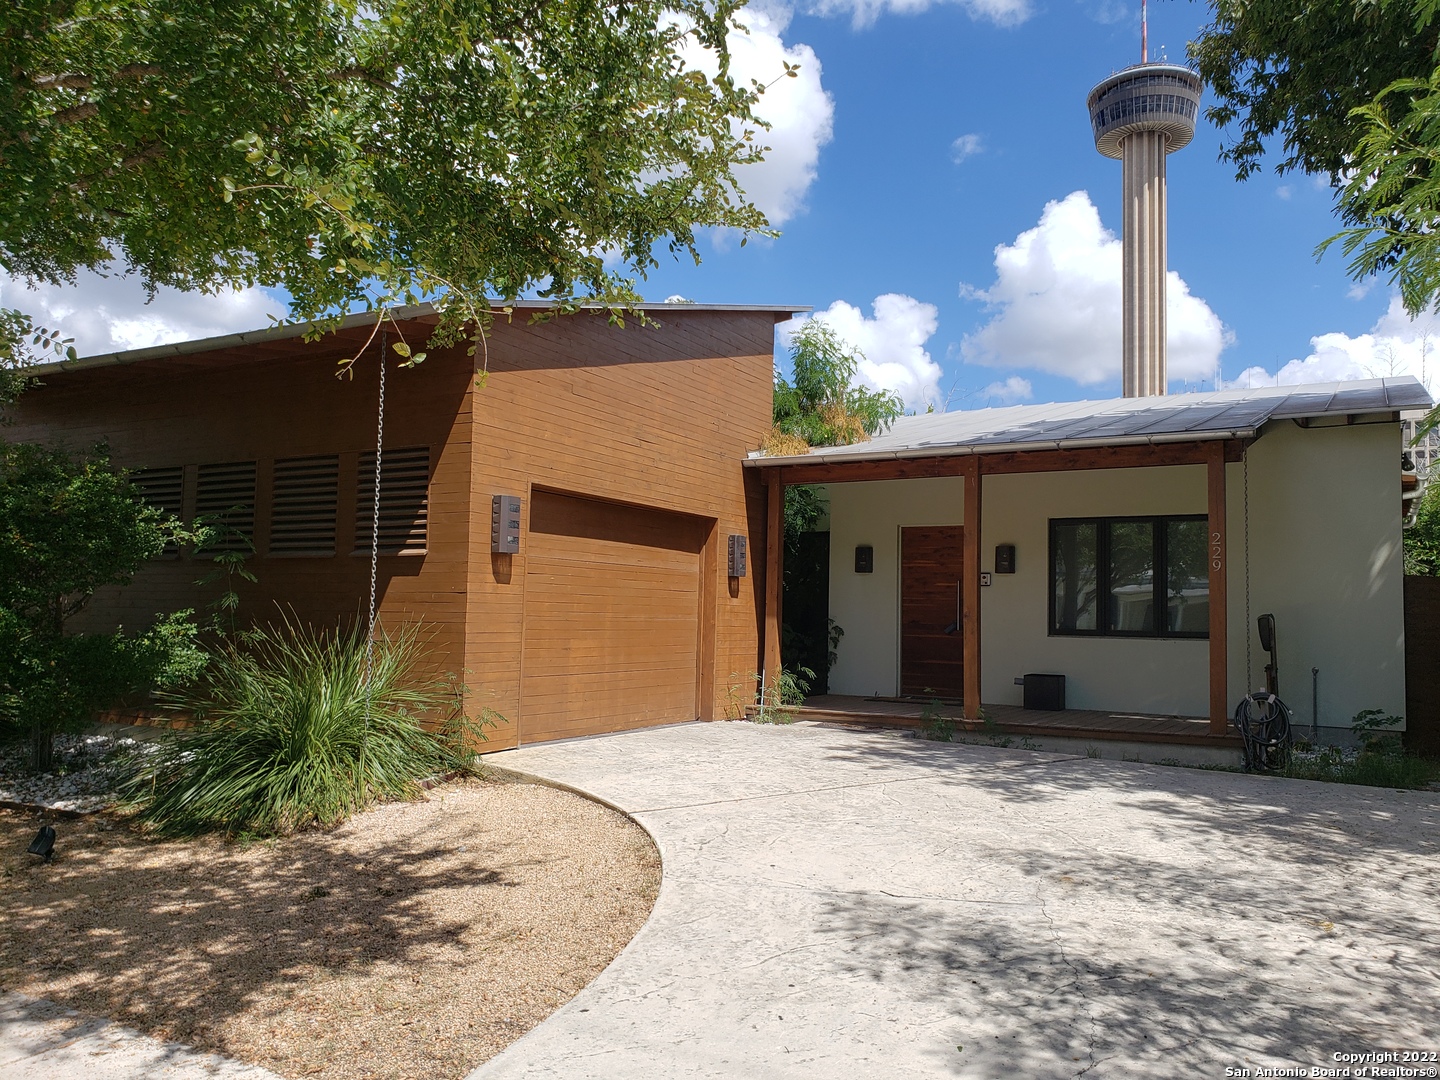 This unique downtown home has more to offer than just a comfortable and convenient location.  This two bedroom two bath custom home is ready for new owners who are looking for the beautiful views of downtown San Antonio.  A custom home for sale in the Historic Lavaca area is rare.  Private backyard,  parking and walking to historical landmarks is just a plus compared to the living space in a downtown home.  Do not miss out!